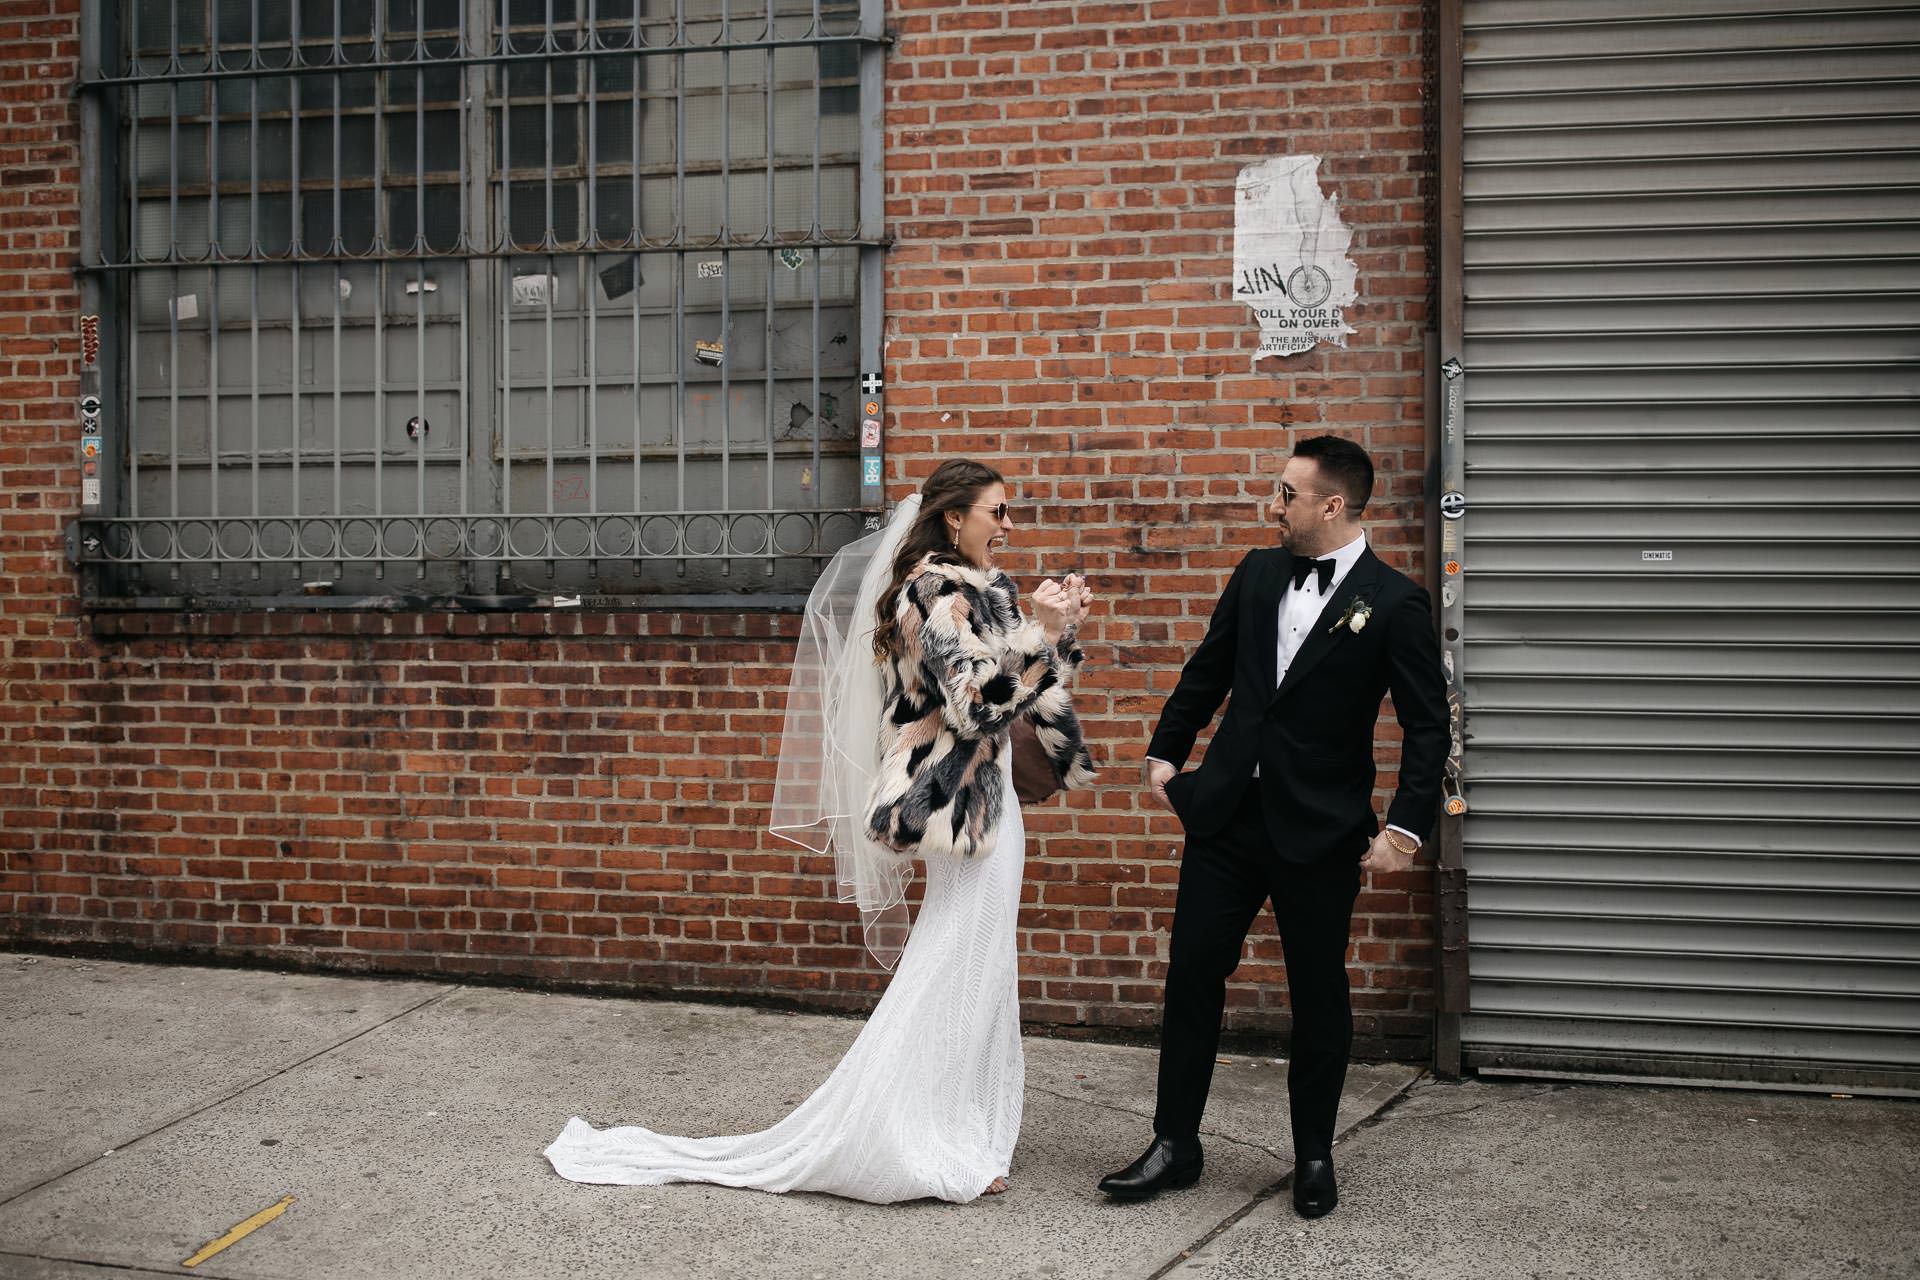 Stephanie & Nick's Wedding at the 501 Union In New York by Jean-Laurent Gaudy